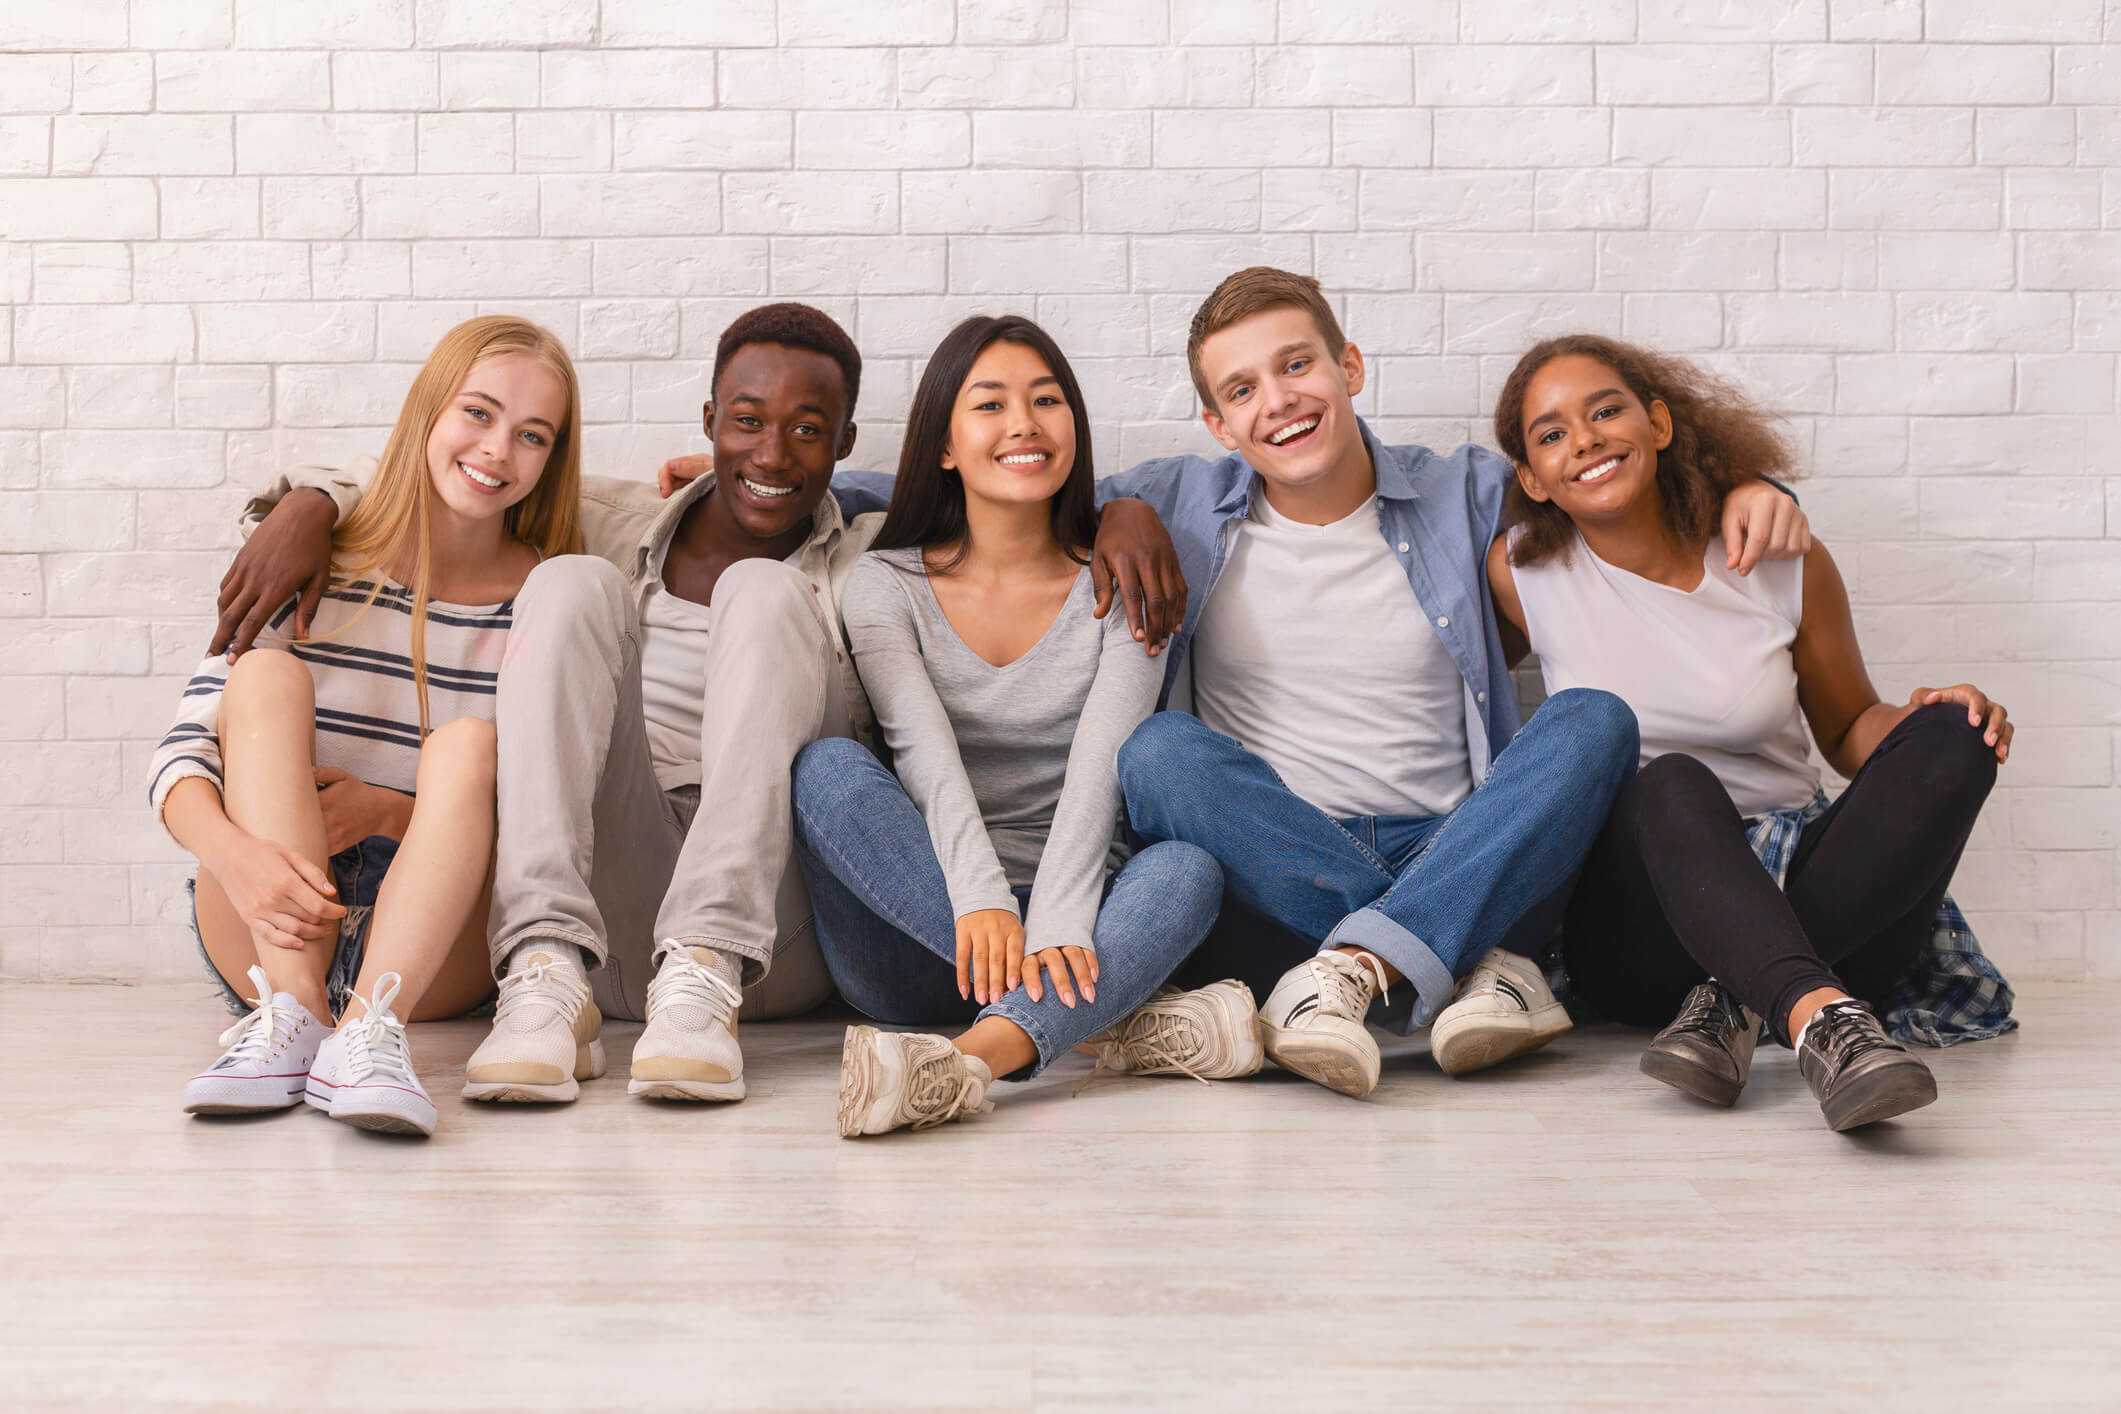 Diverse group of teens smiling and sitting together in front of a white brick wall